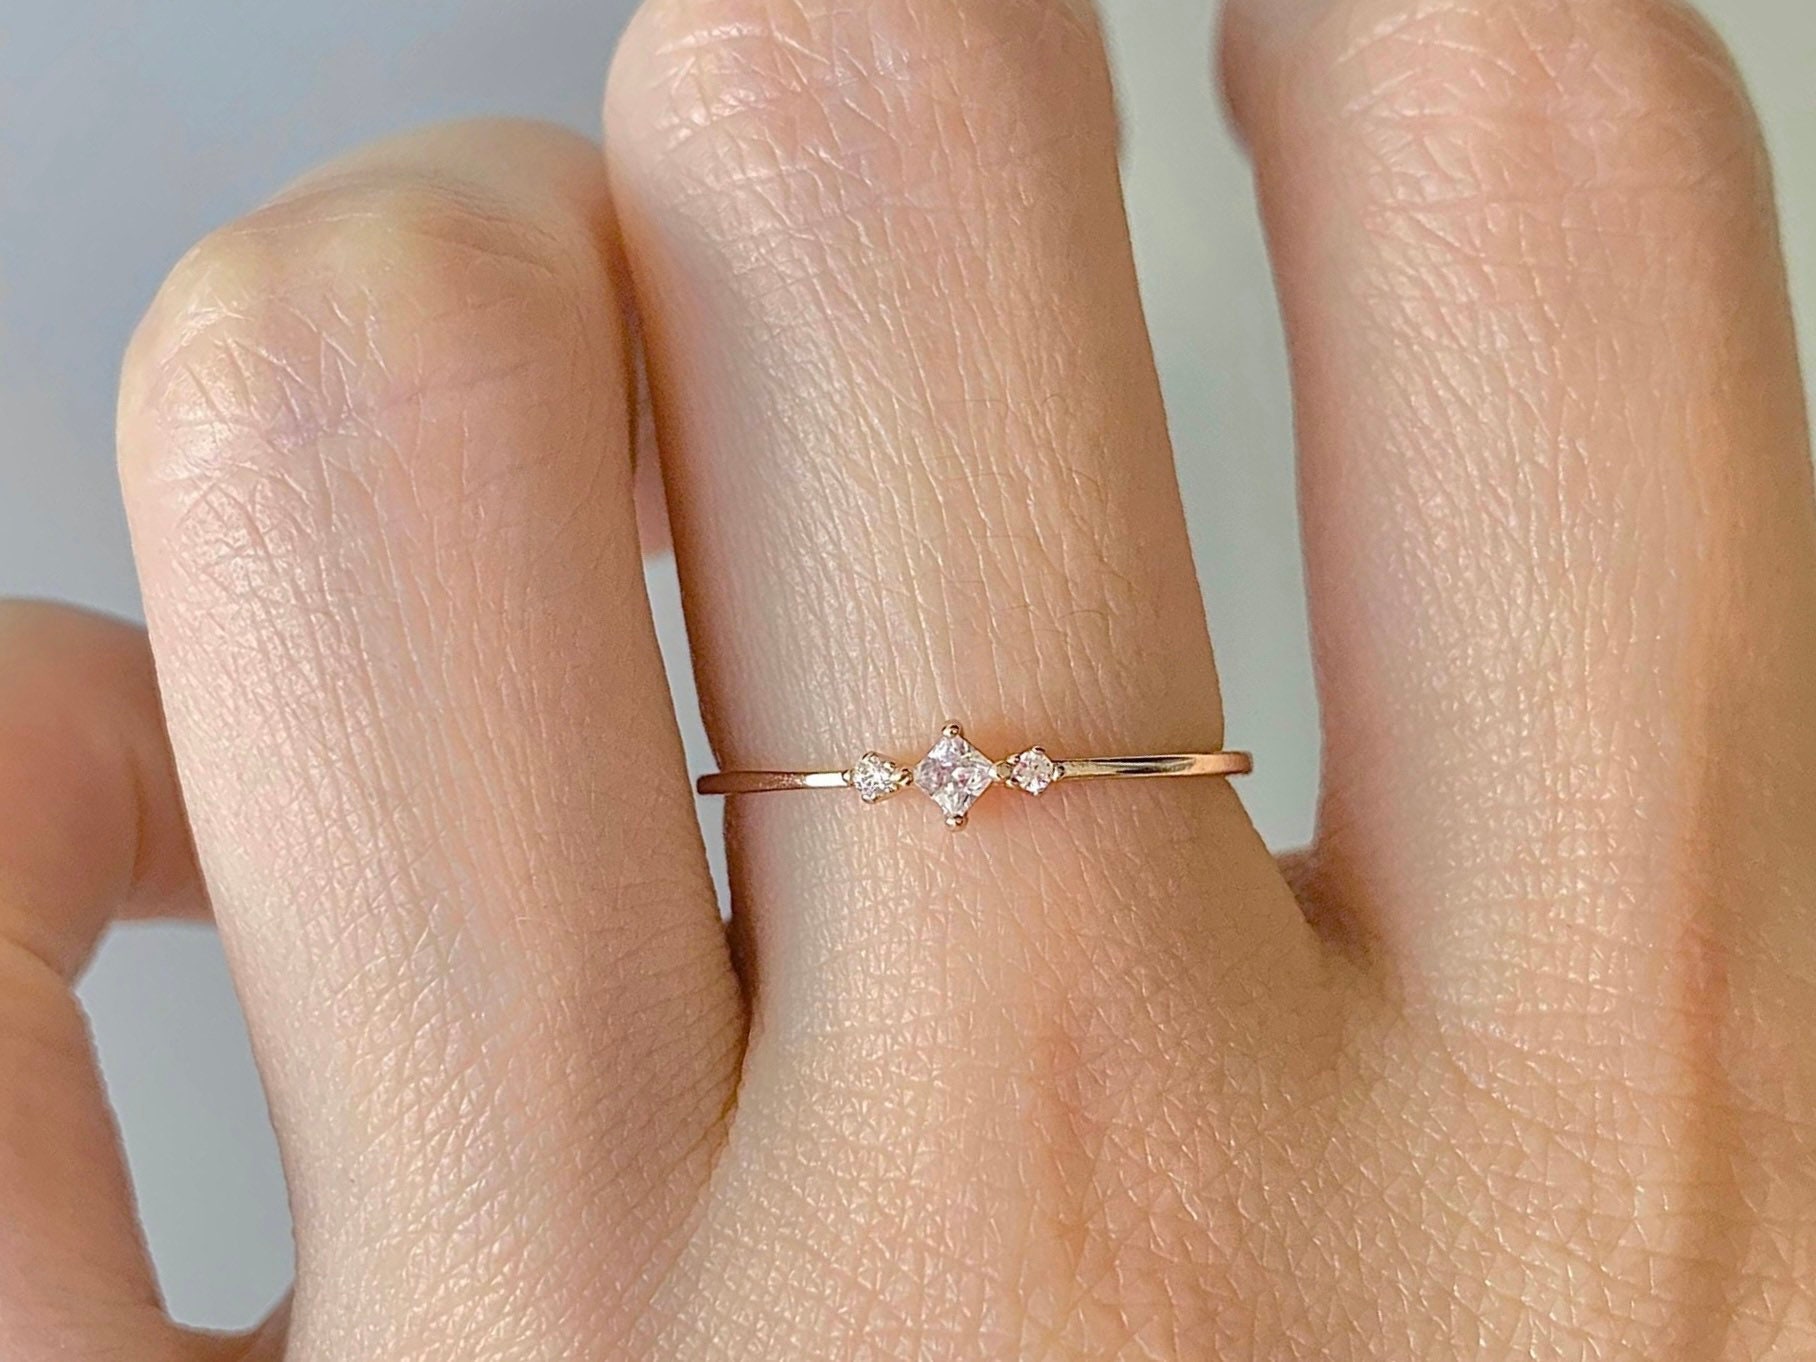 Ava Crystal Ring Silver Rings For Women Rose Gold Ring Gemstone 14K Solid  Gold Ring Gift Dainty Ring Statement Ring Minimalist Gold Jewelry